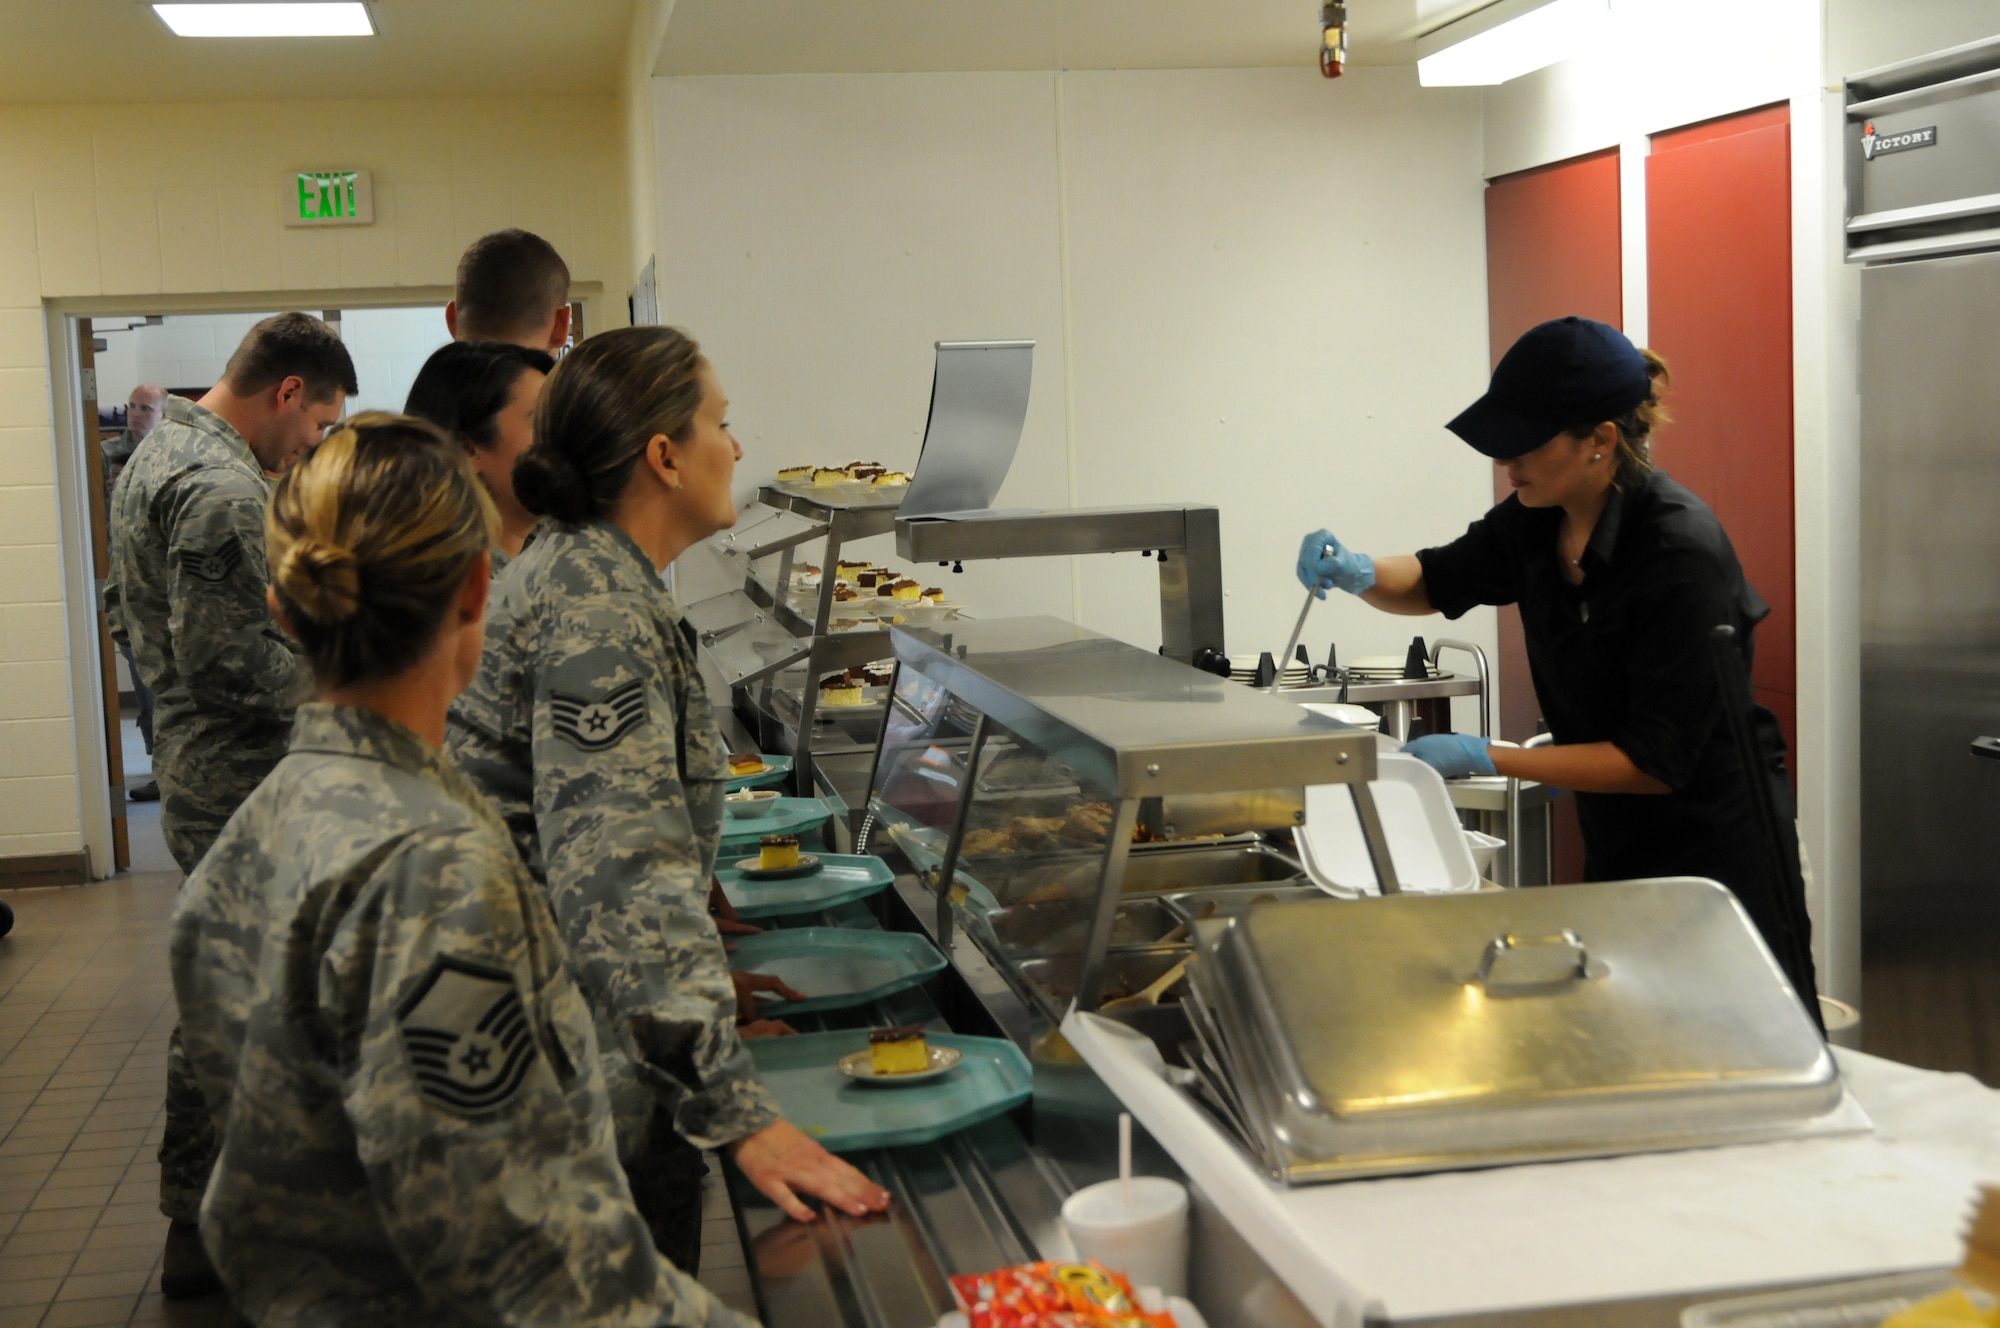 A food service worker serves wing members during lunch Aug. 5.  The new contract, awarded in late July, brings a new crew of civilian workers who will assist Services personnel with the preparation and serving of more than 1,000 meals each drill weekend.